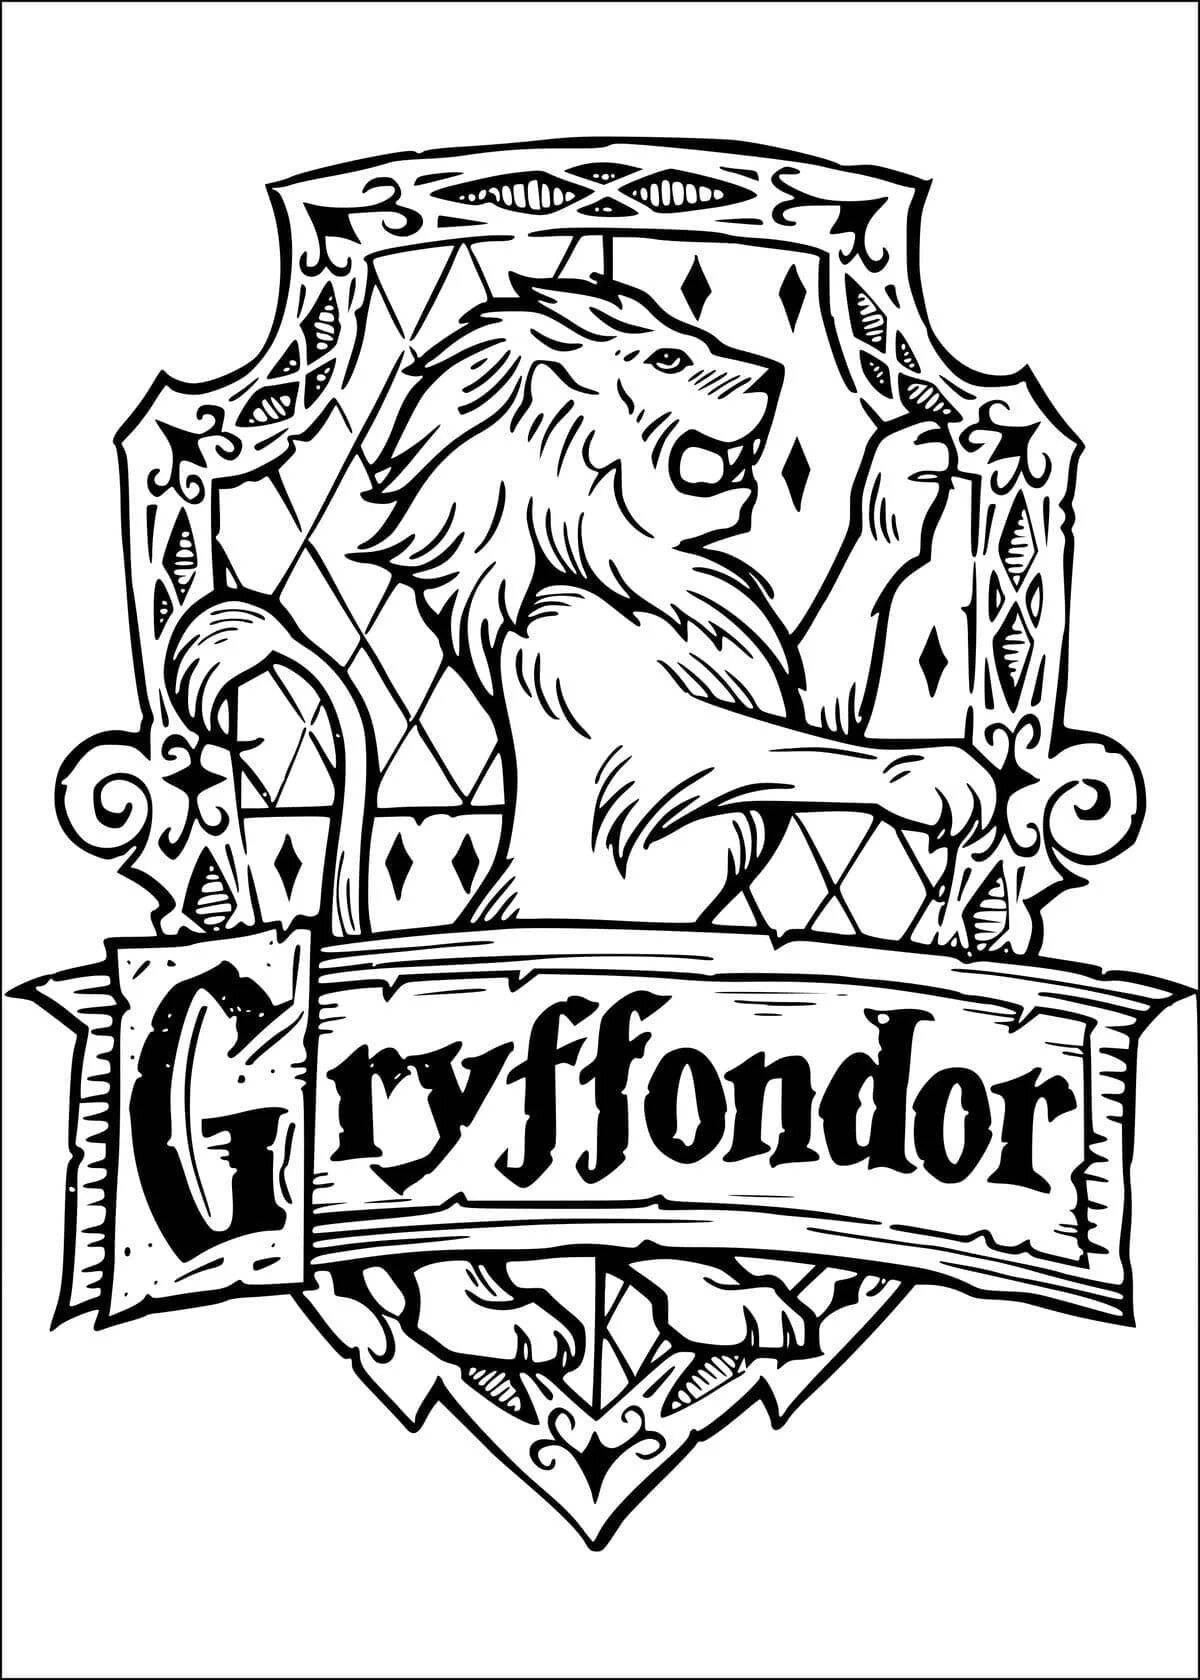 Charming Gryffindor coloring page